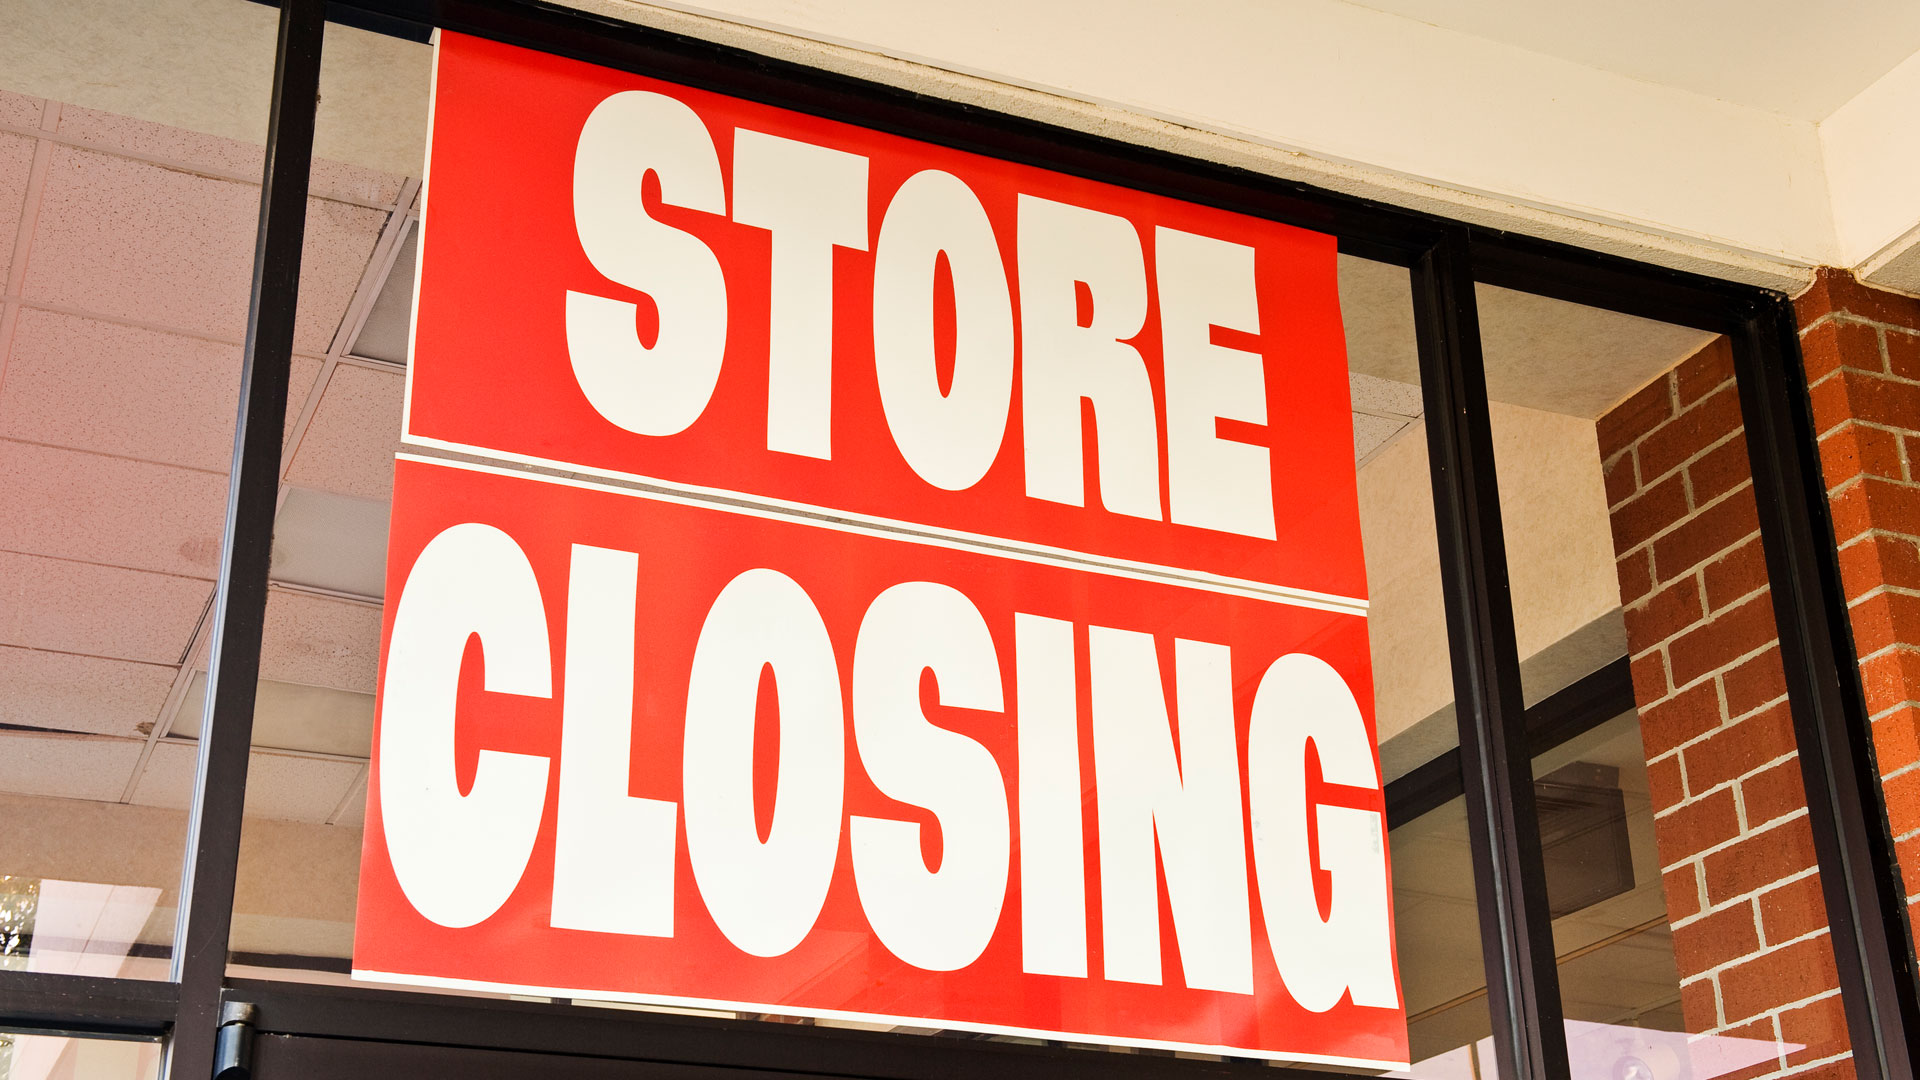 ‘Worst news all year,’ cry customers as book store chain with 600 locations confirms closure – all items are 25% off [Video]